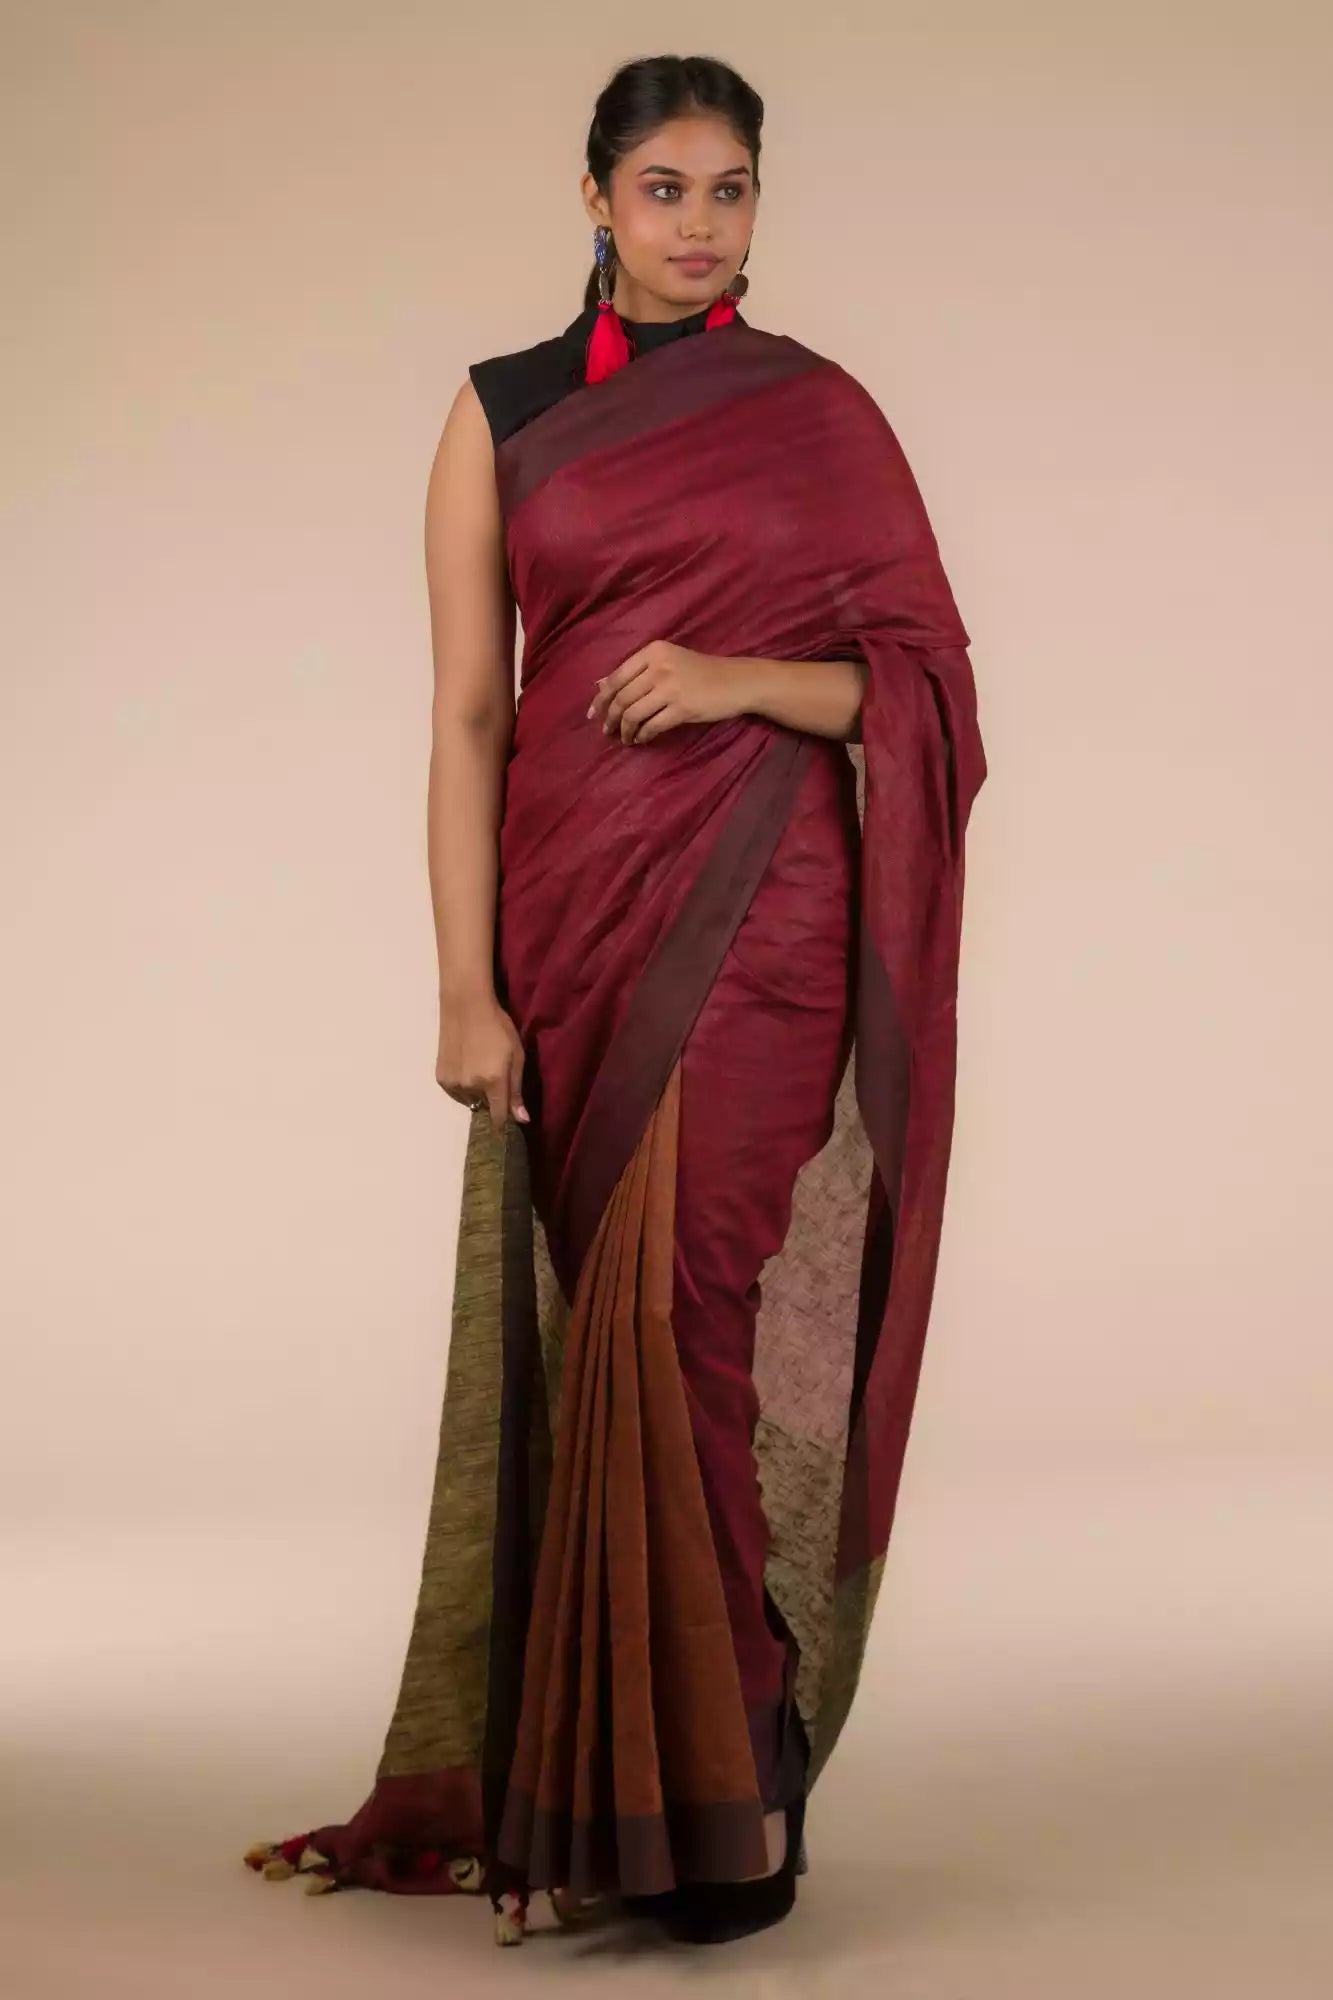 A model in Earthy Brown Pure Linen Saree with Maroon Pleats and Anchal in Beige a womens workwear is standing  against a beige background